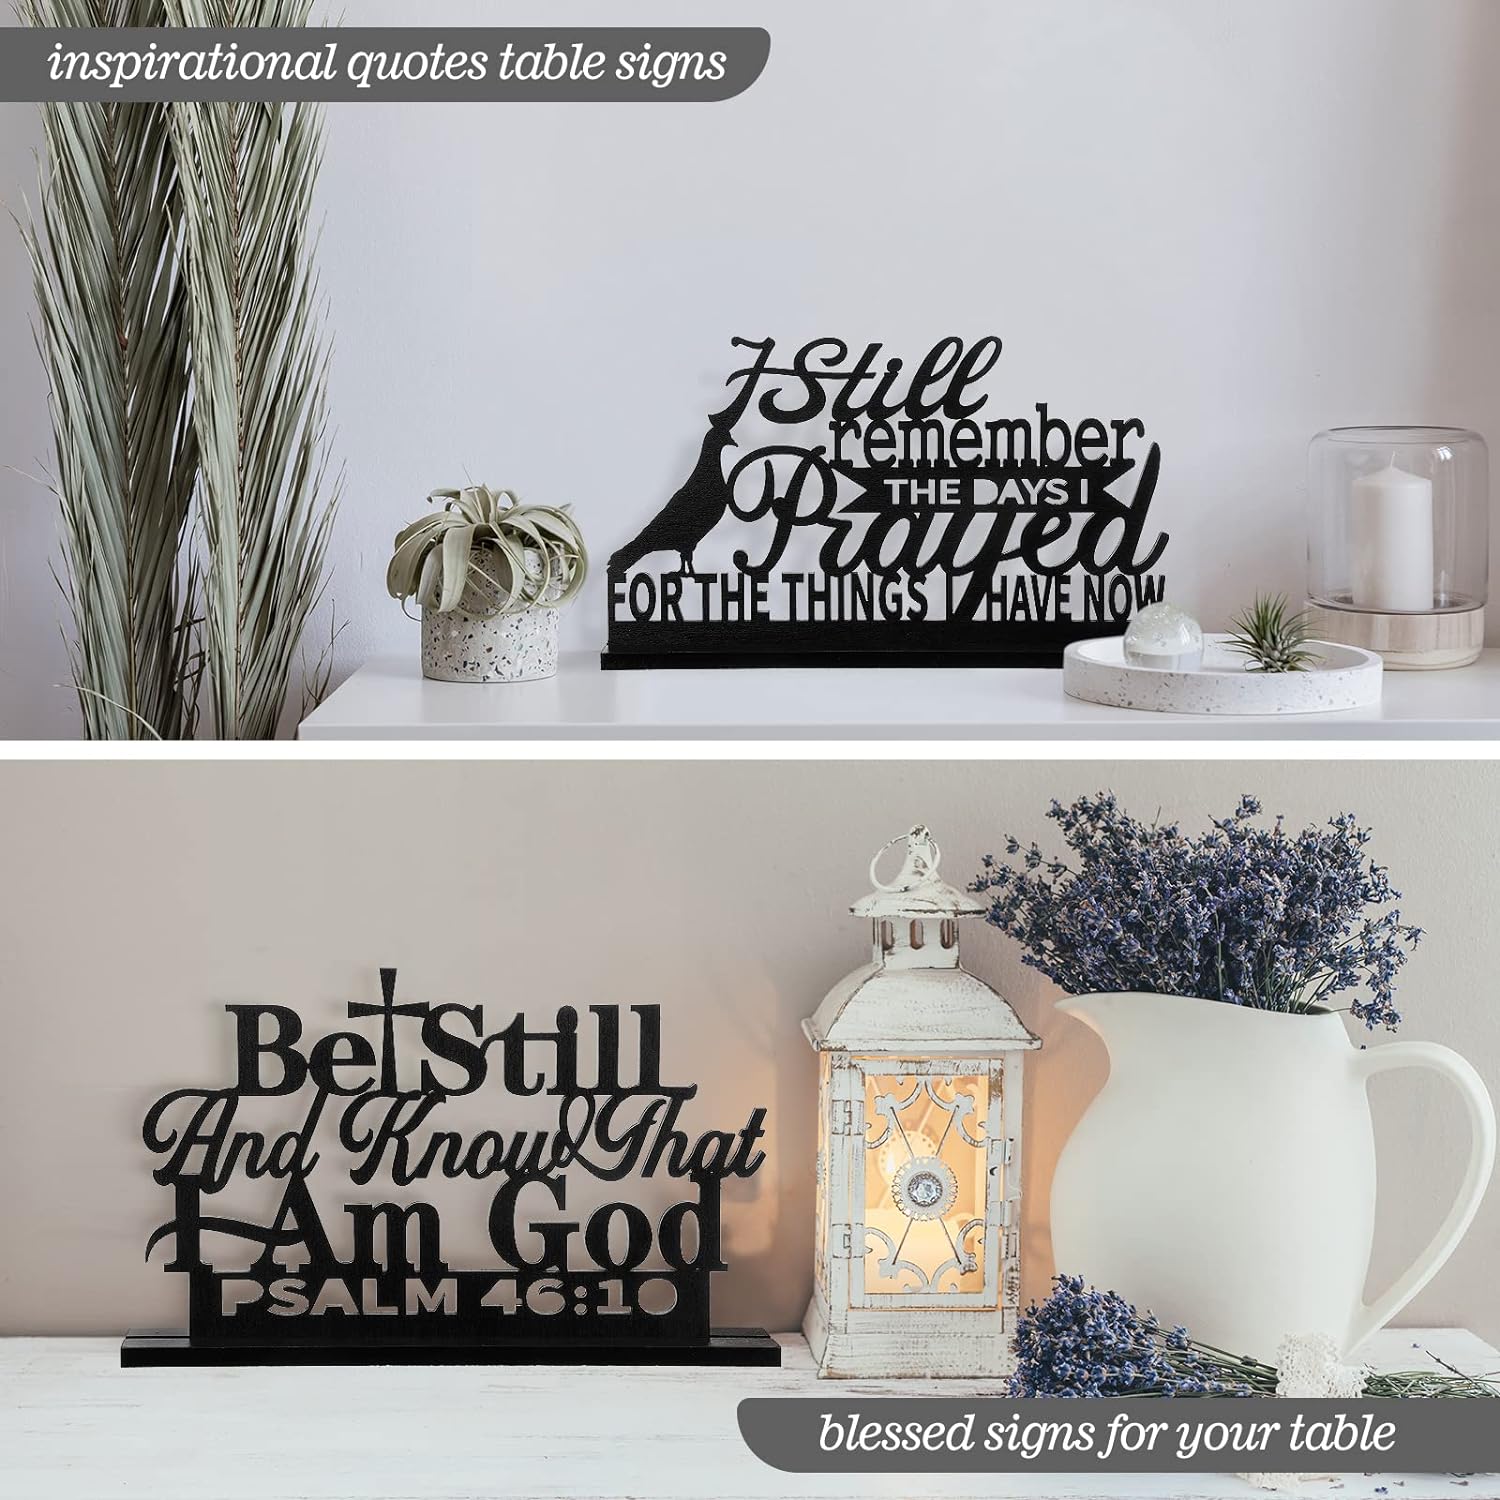 4 Pcs Inspirational Table Art Signs Motivational Table Centerpieces I Still Remember The Days Table Decor